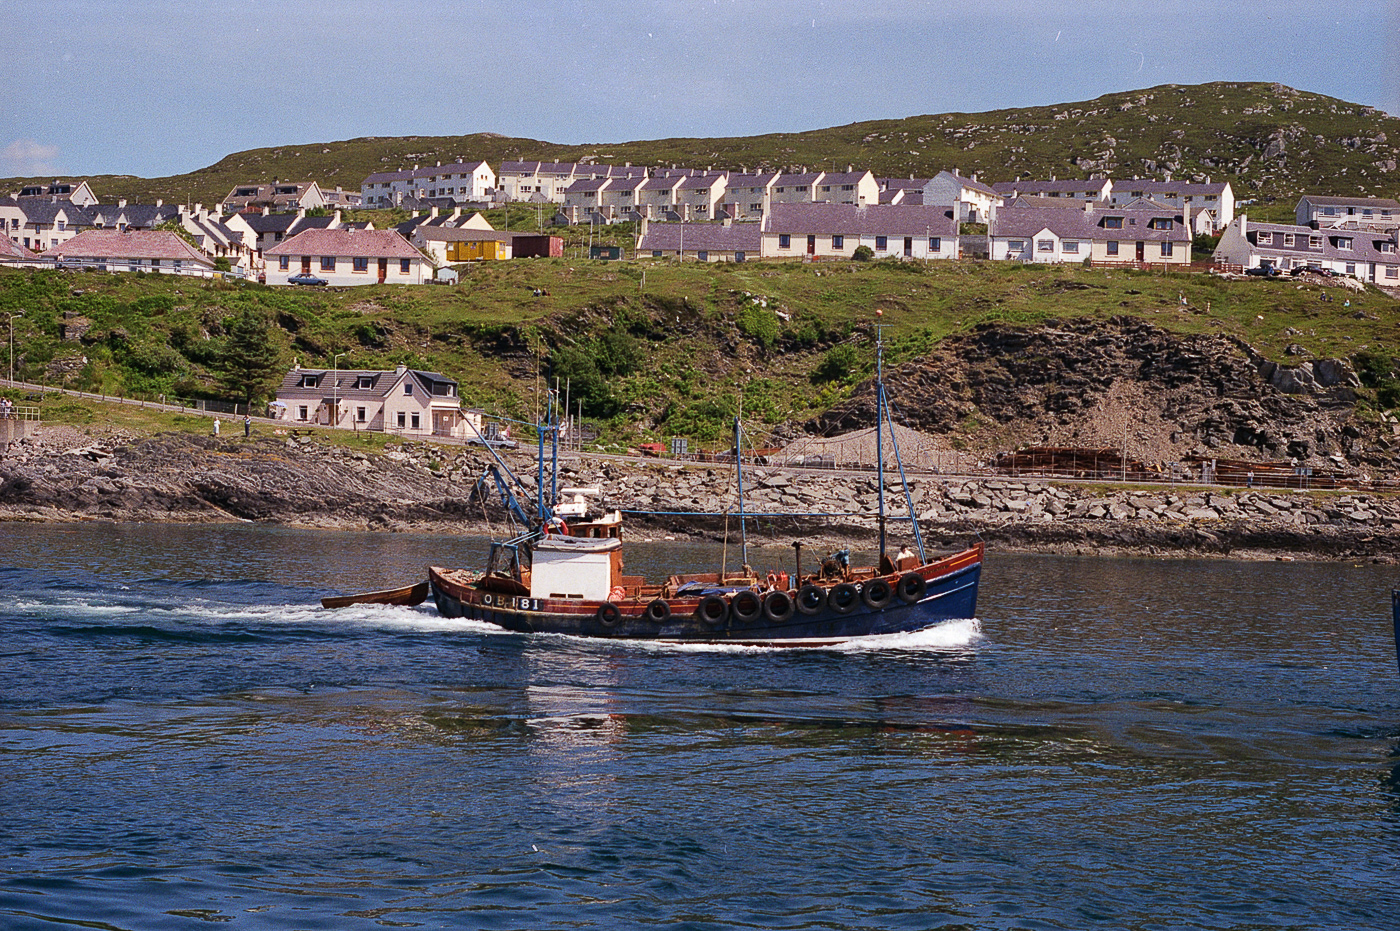 'Pathfinder', OB181, Mallaig, June 1988. She was originally built as a dual purpose ringnetter and trawler.